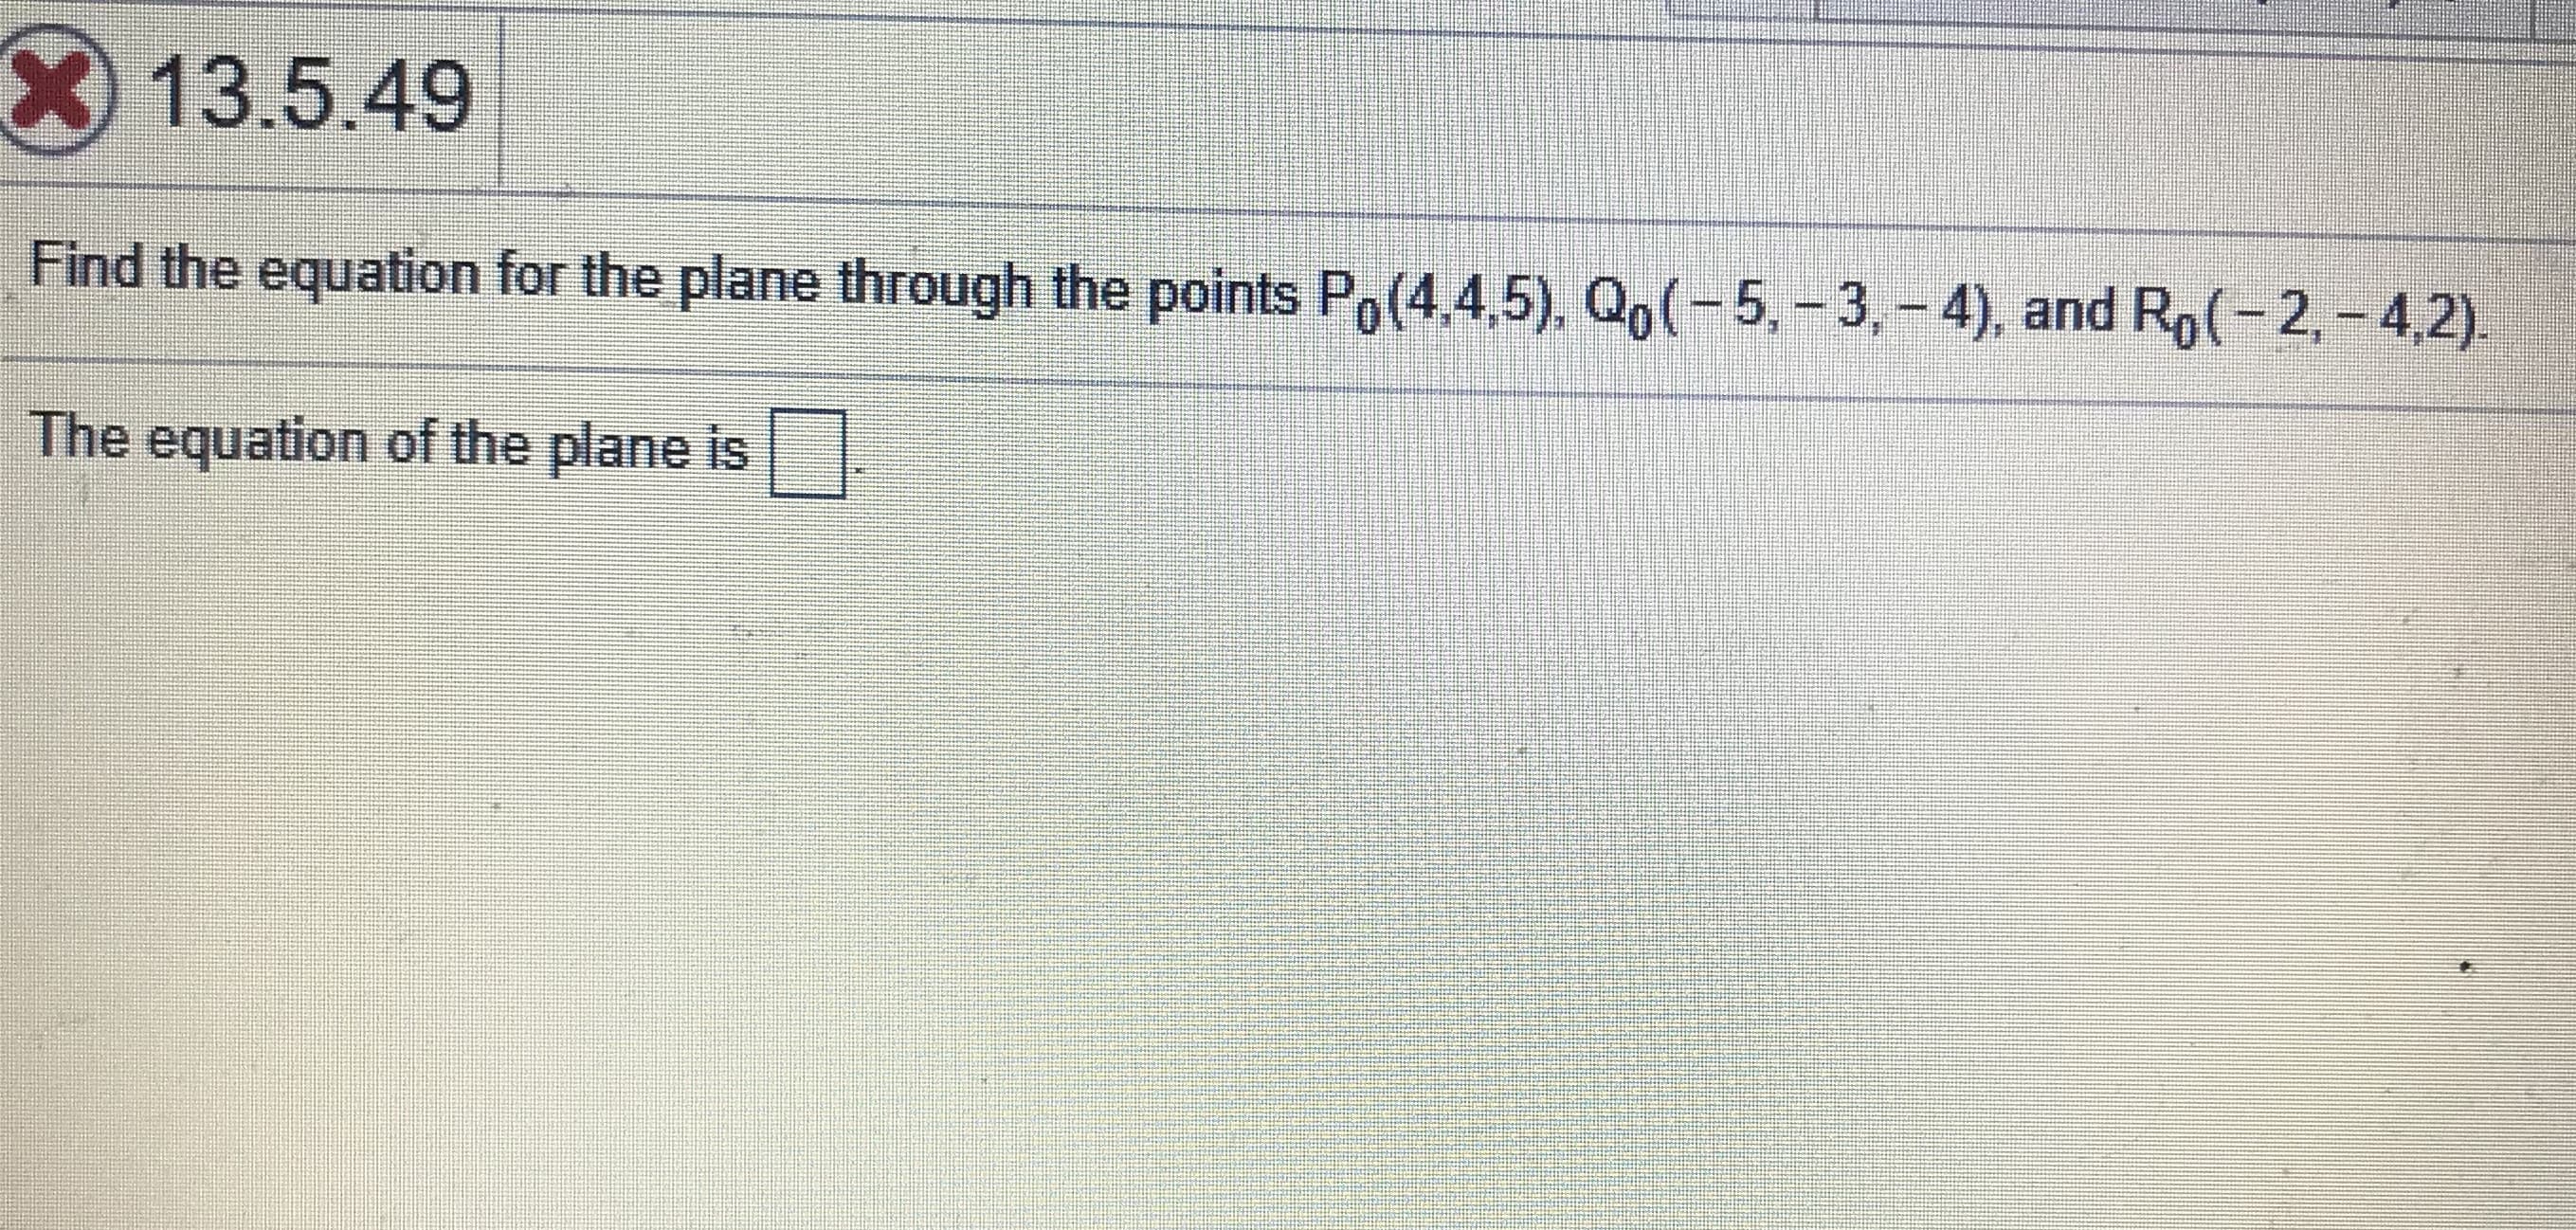 Find the equation for the plane through the points Po(4.4,5), Qo(-5,-3,- 4), and Ro(-2,- 4,2).
The equation of the plane is
